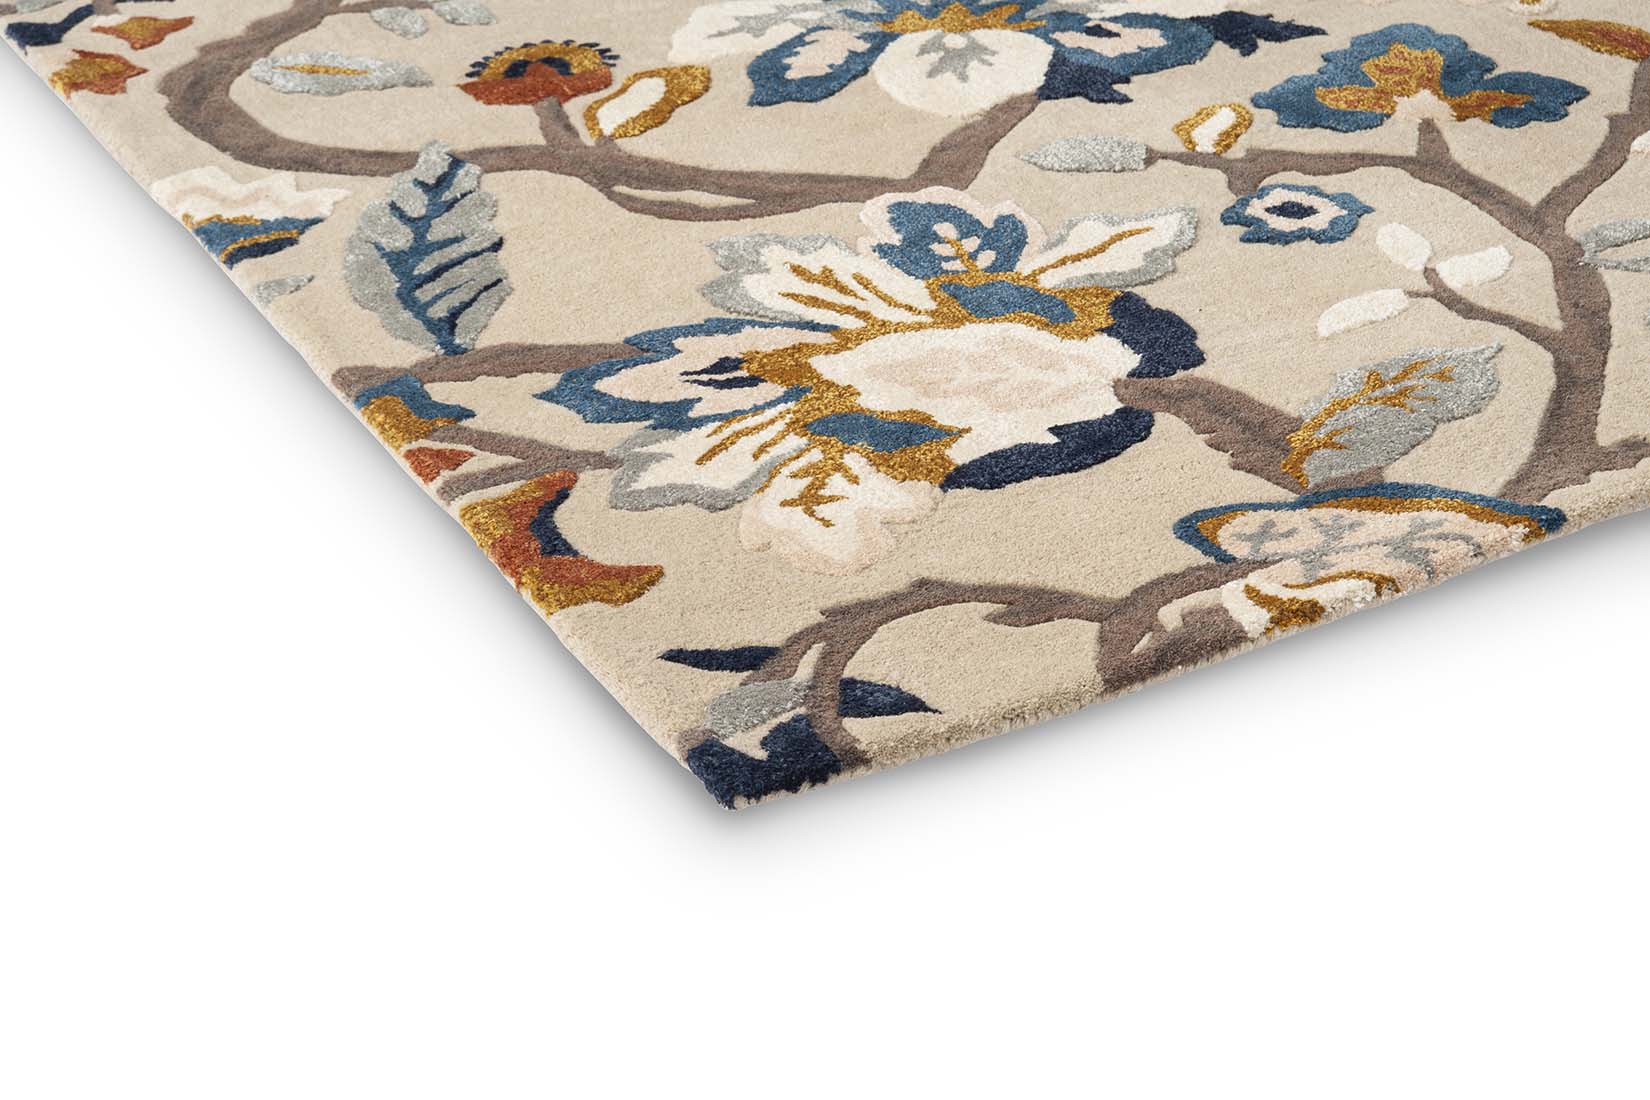 stone coloured wool and viscose rug with multicolour floral design
